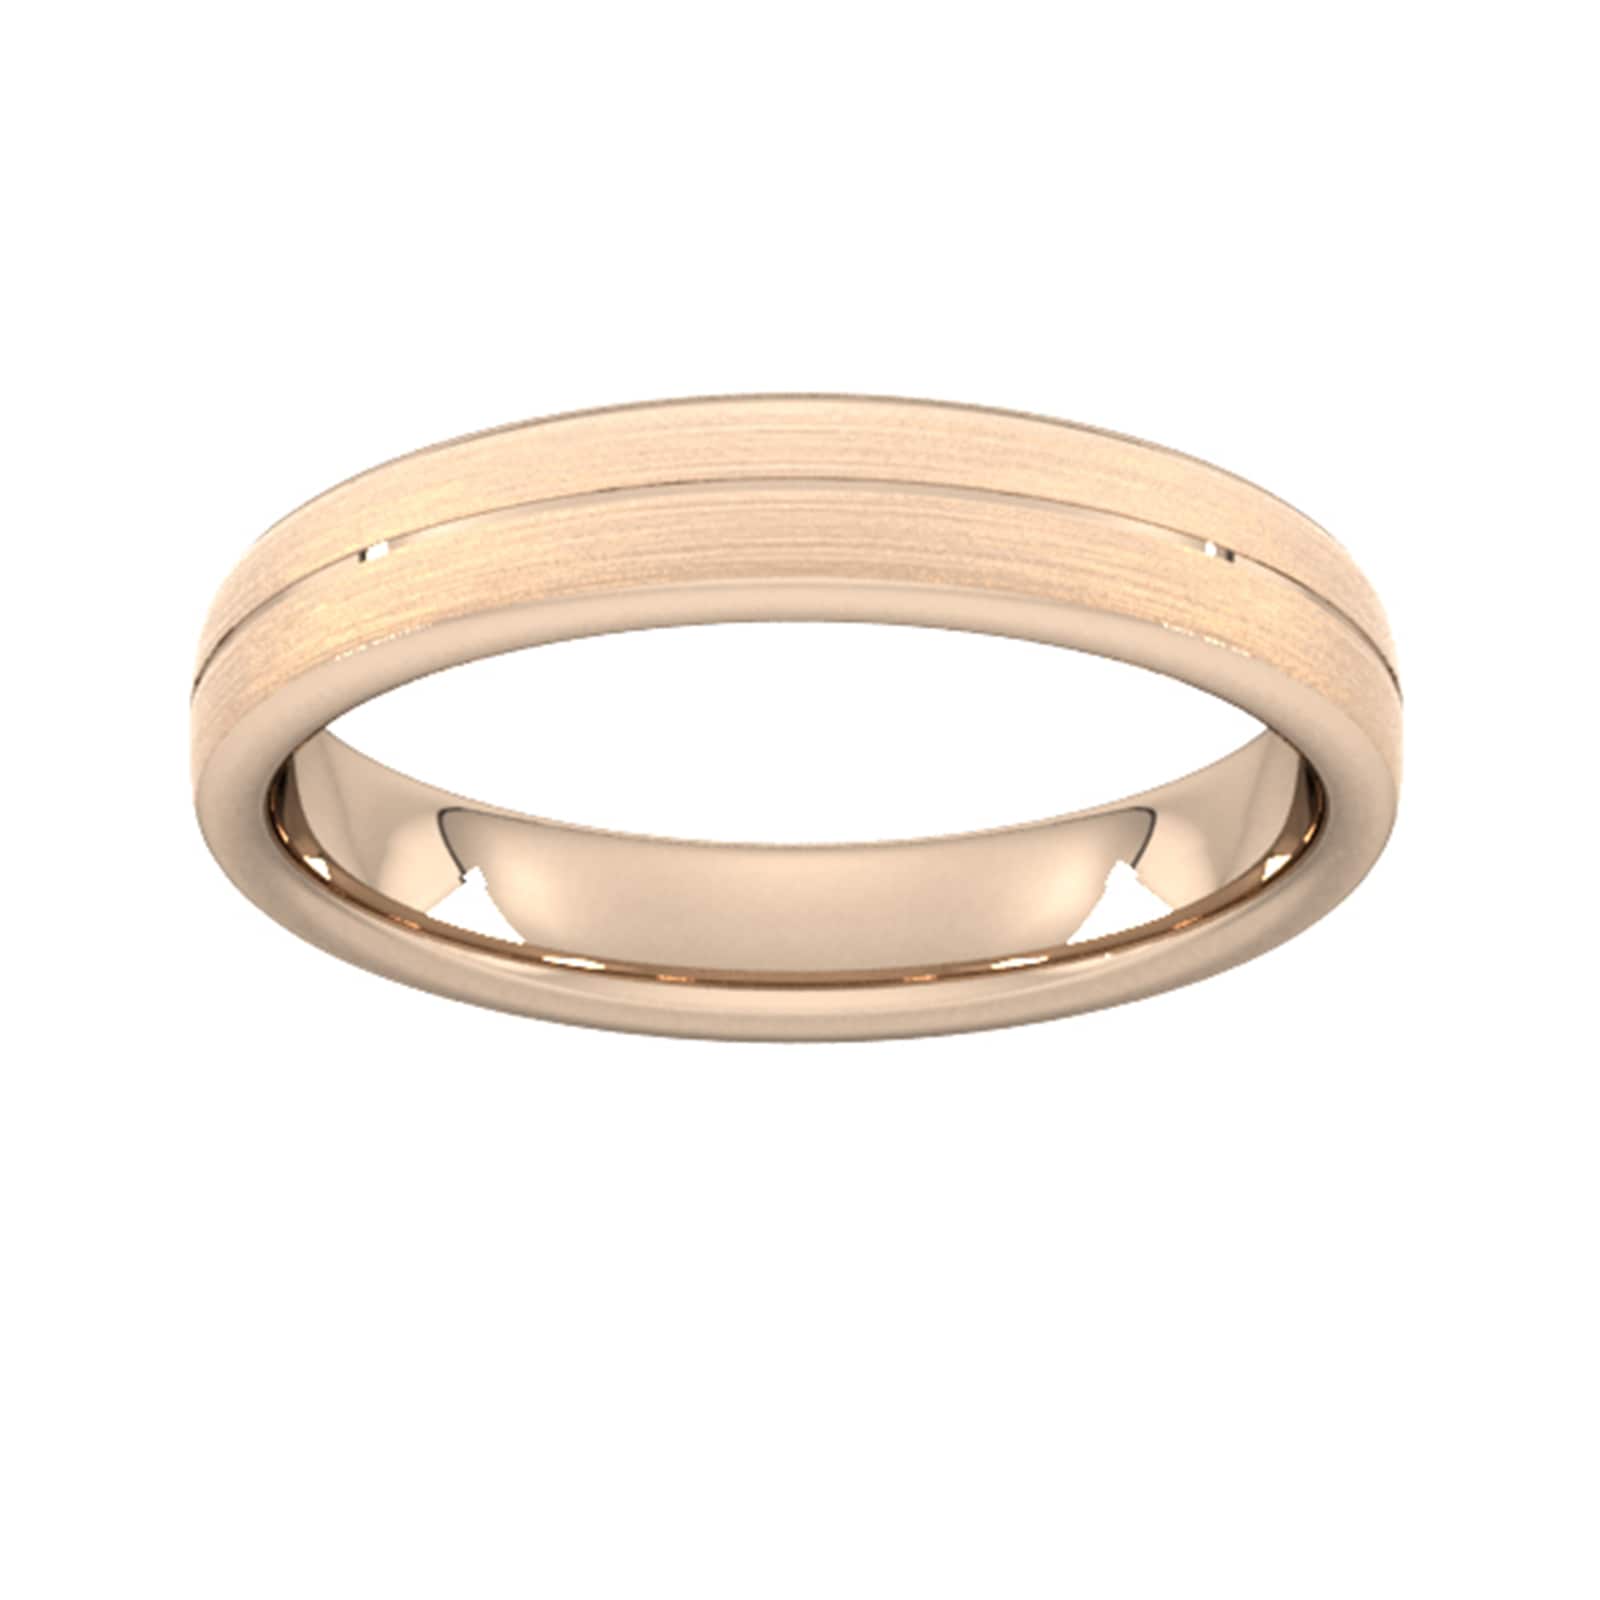 4mm Traditional Court Standard Centre Groove With Chamfered Edge Wedding Ring In 18 Carat Rose Gold - Ring Size S